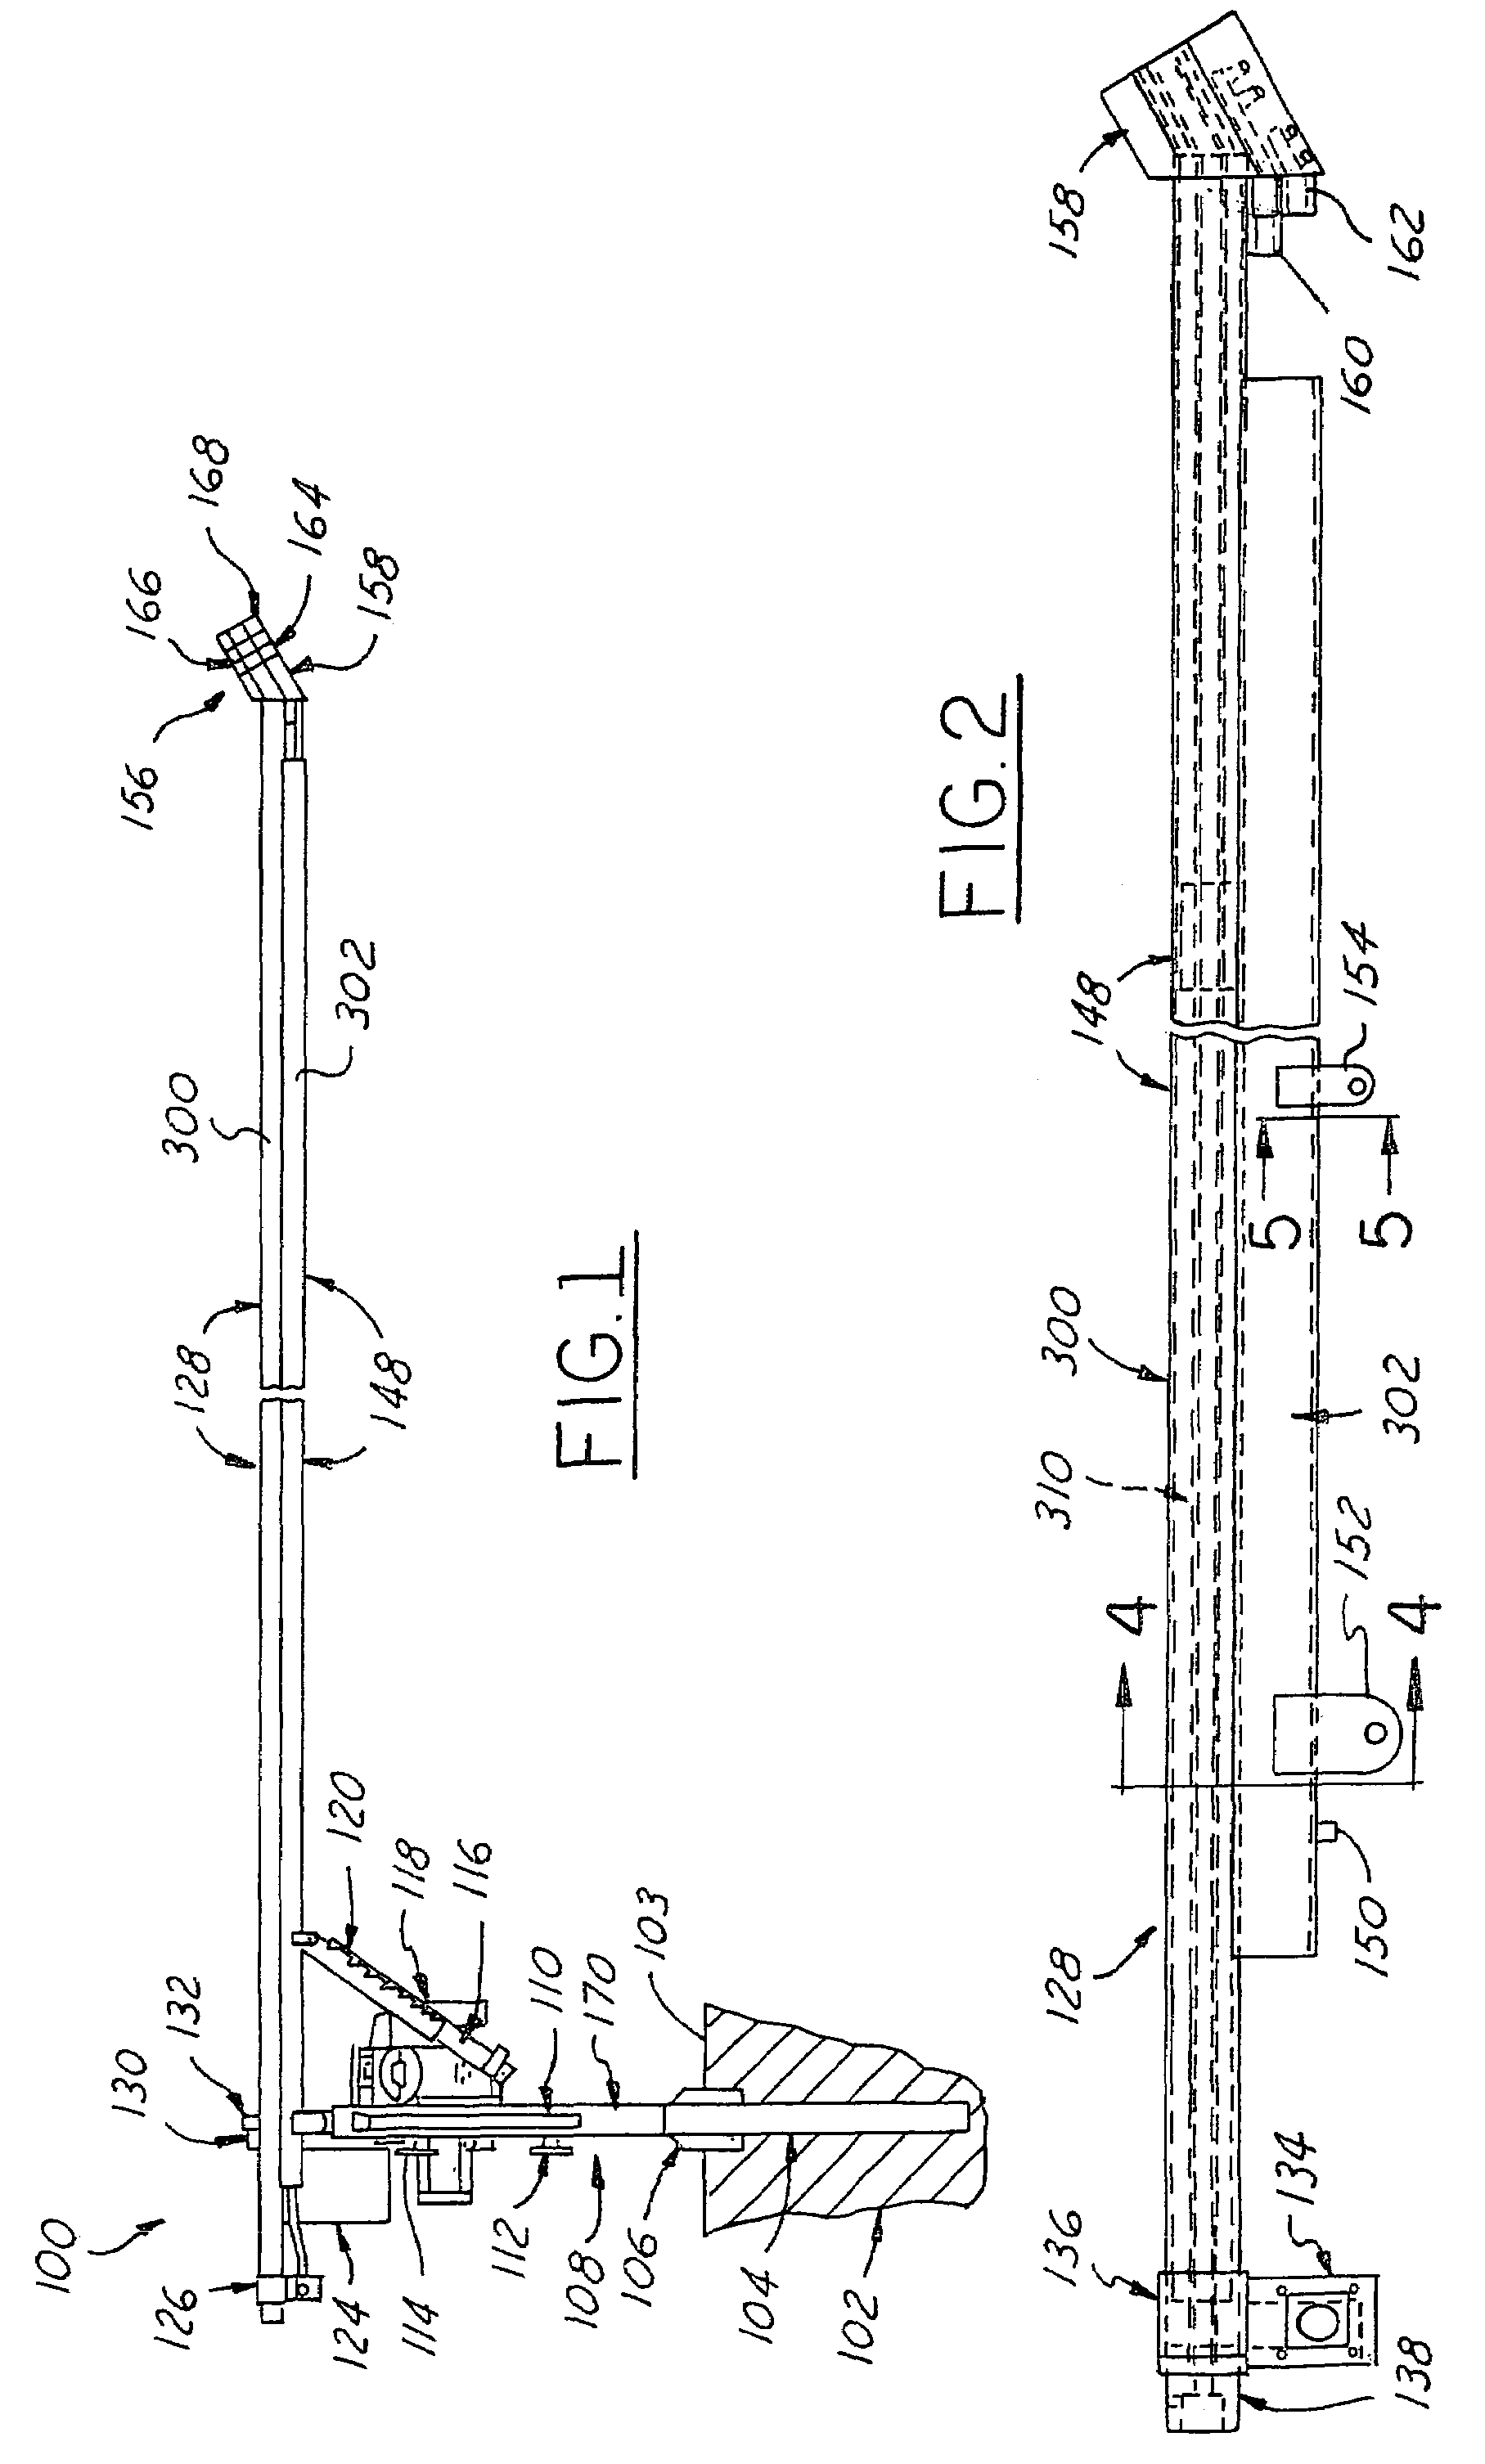 Method and apparatus for making snow